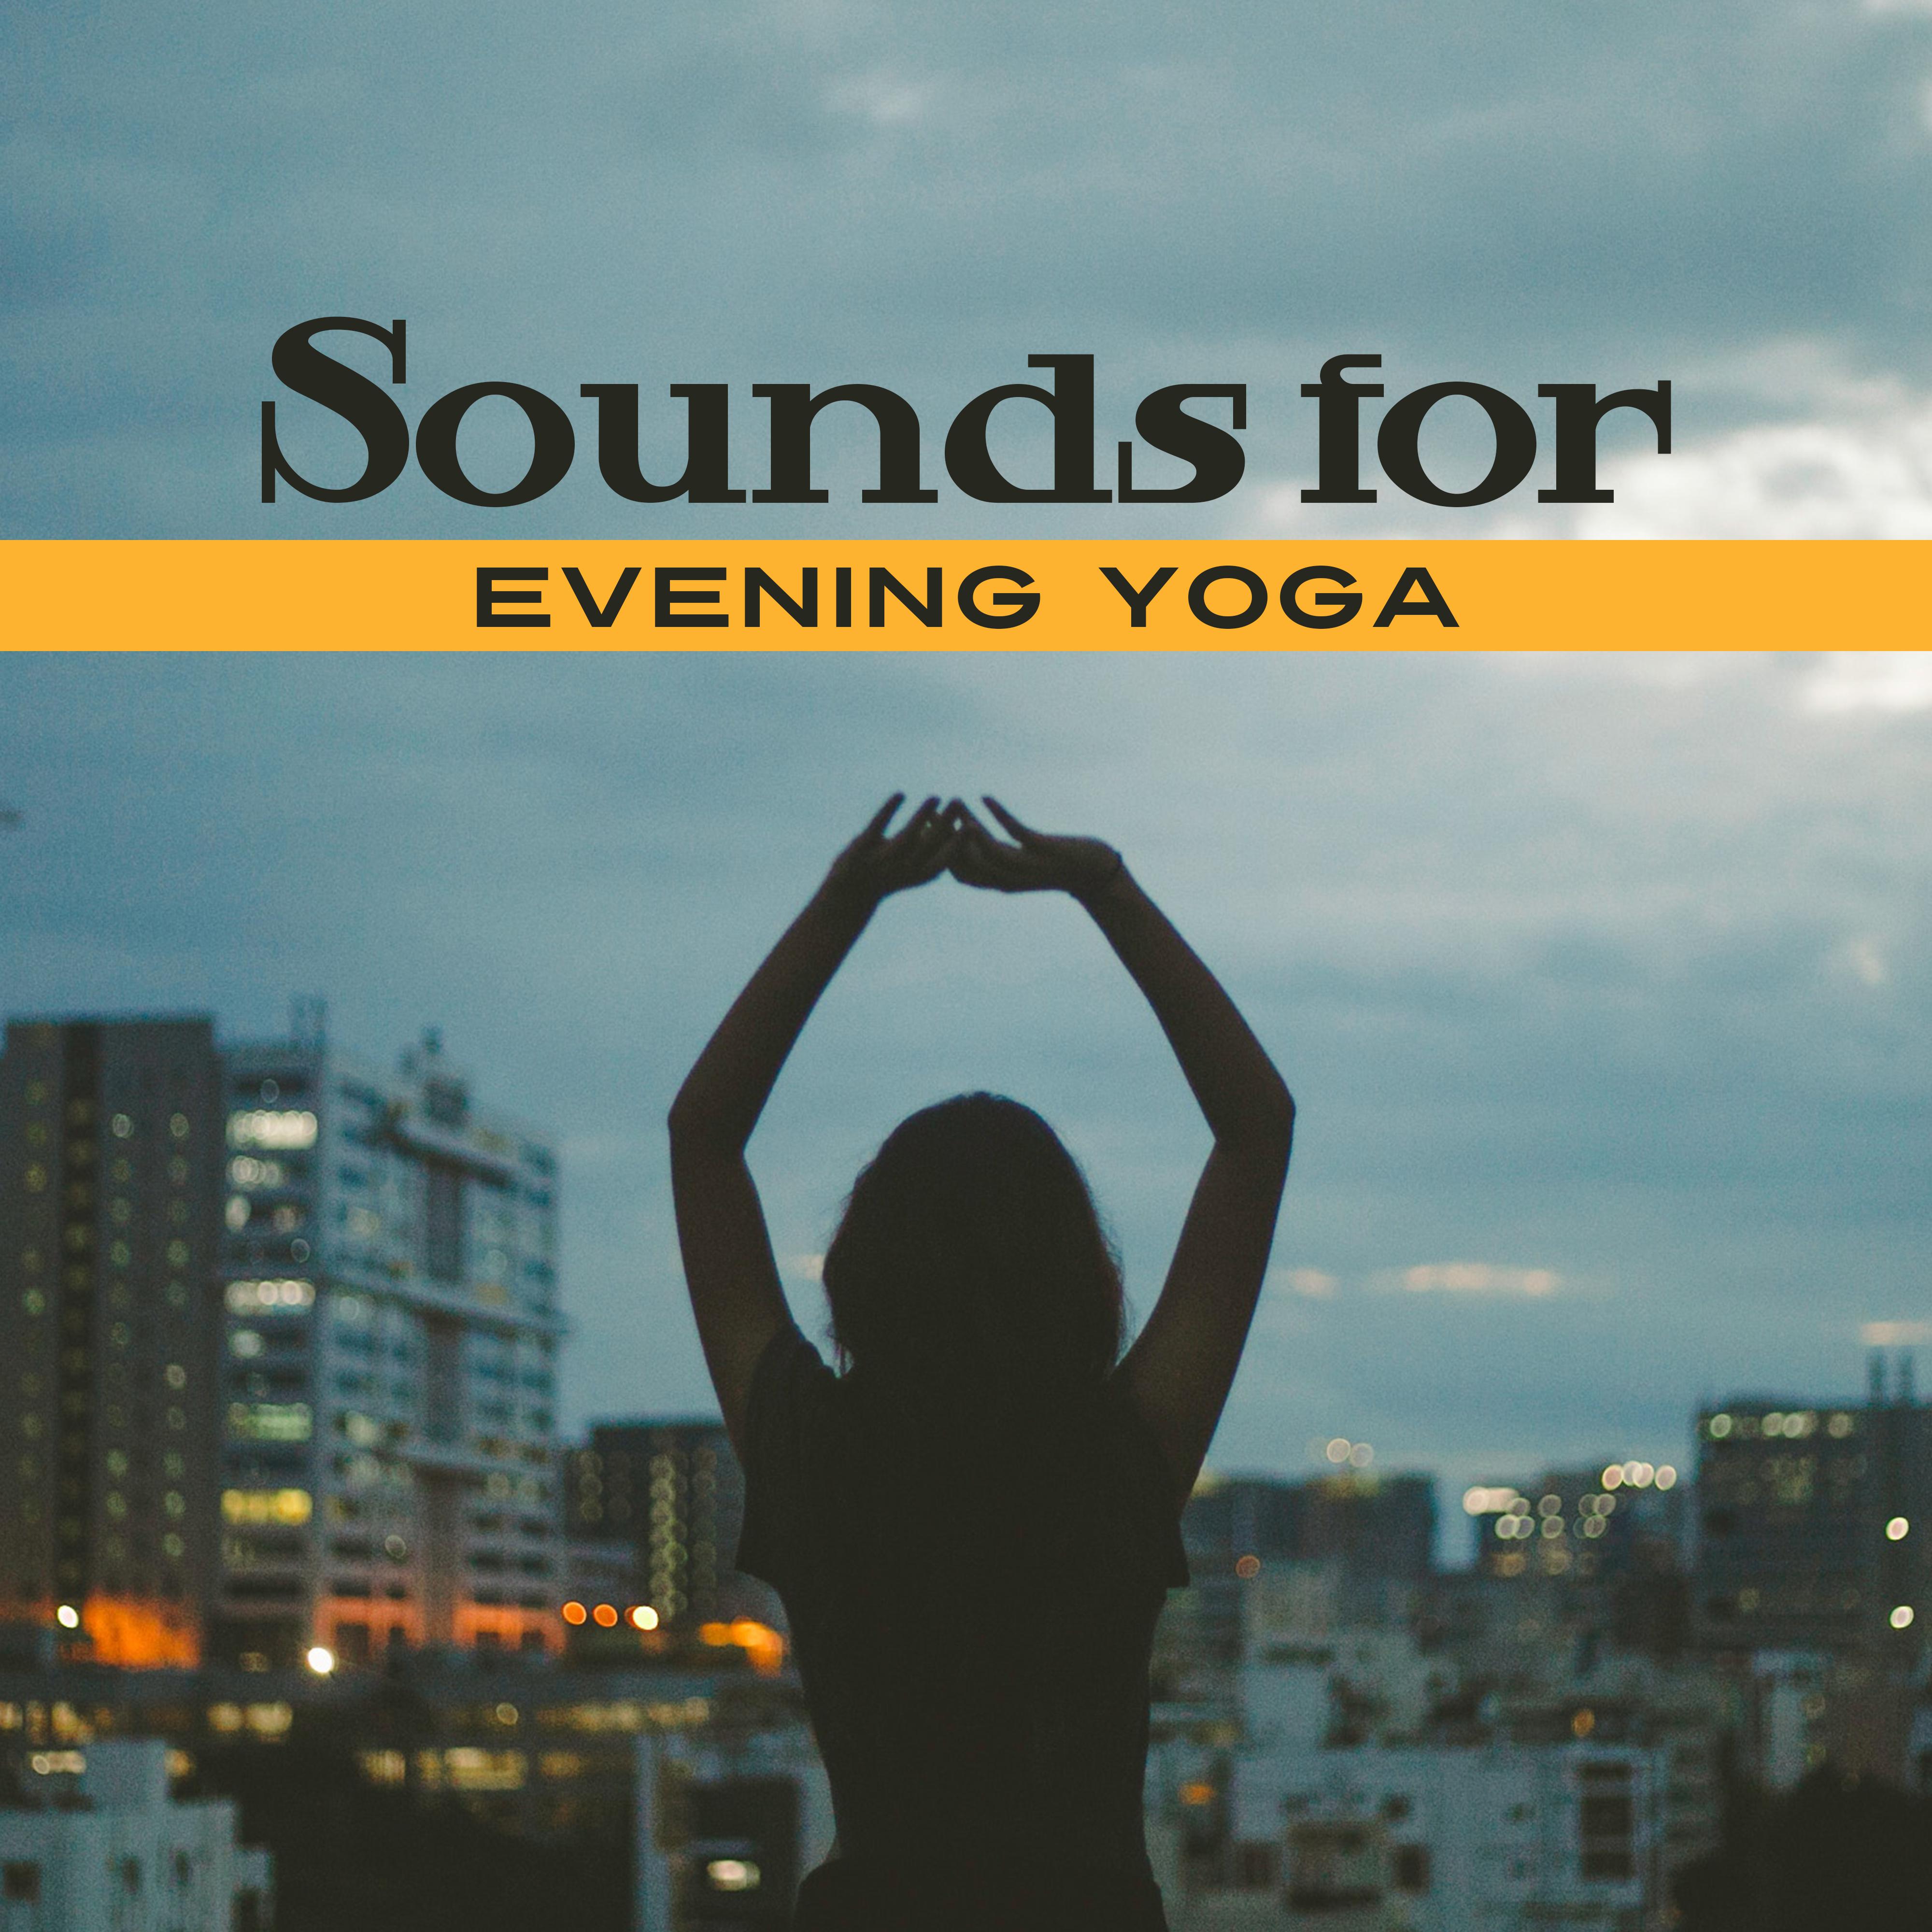 Sounds for Evening Yoga  Soft Sounds to Meditate, Yoga Training, Peaceful Mind  Body, Stress Free